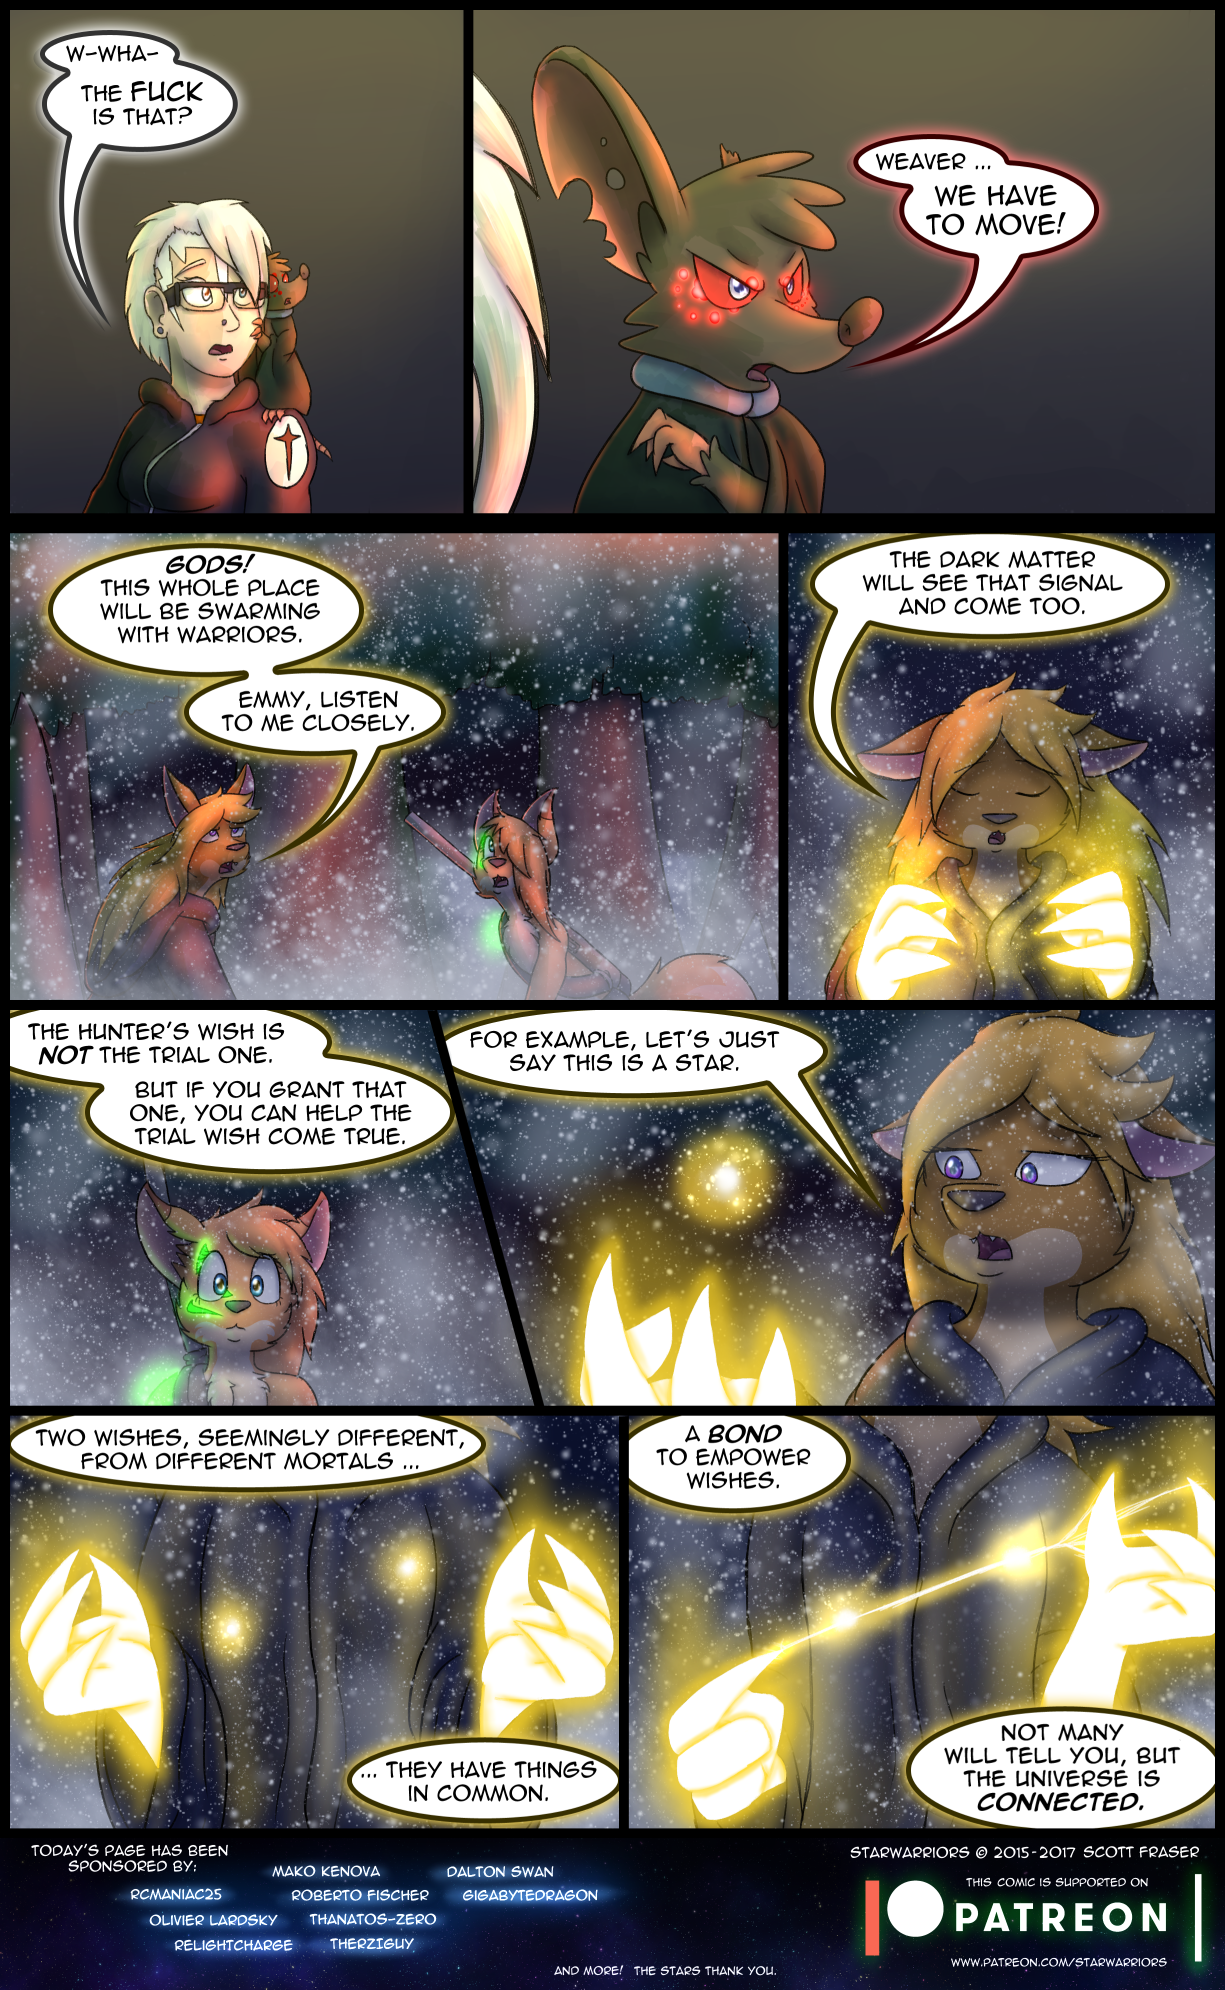 Ch3 Page 10 – Connection